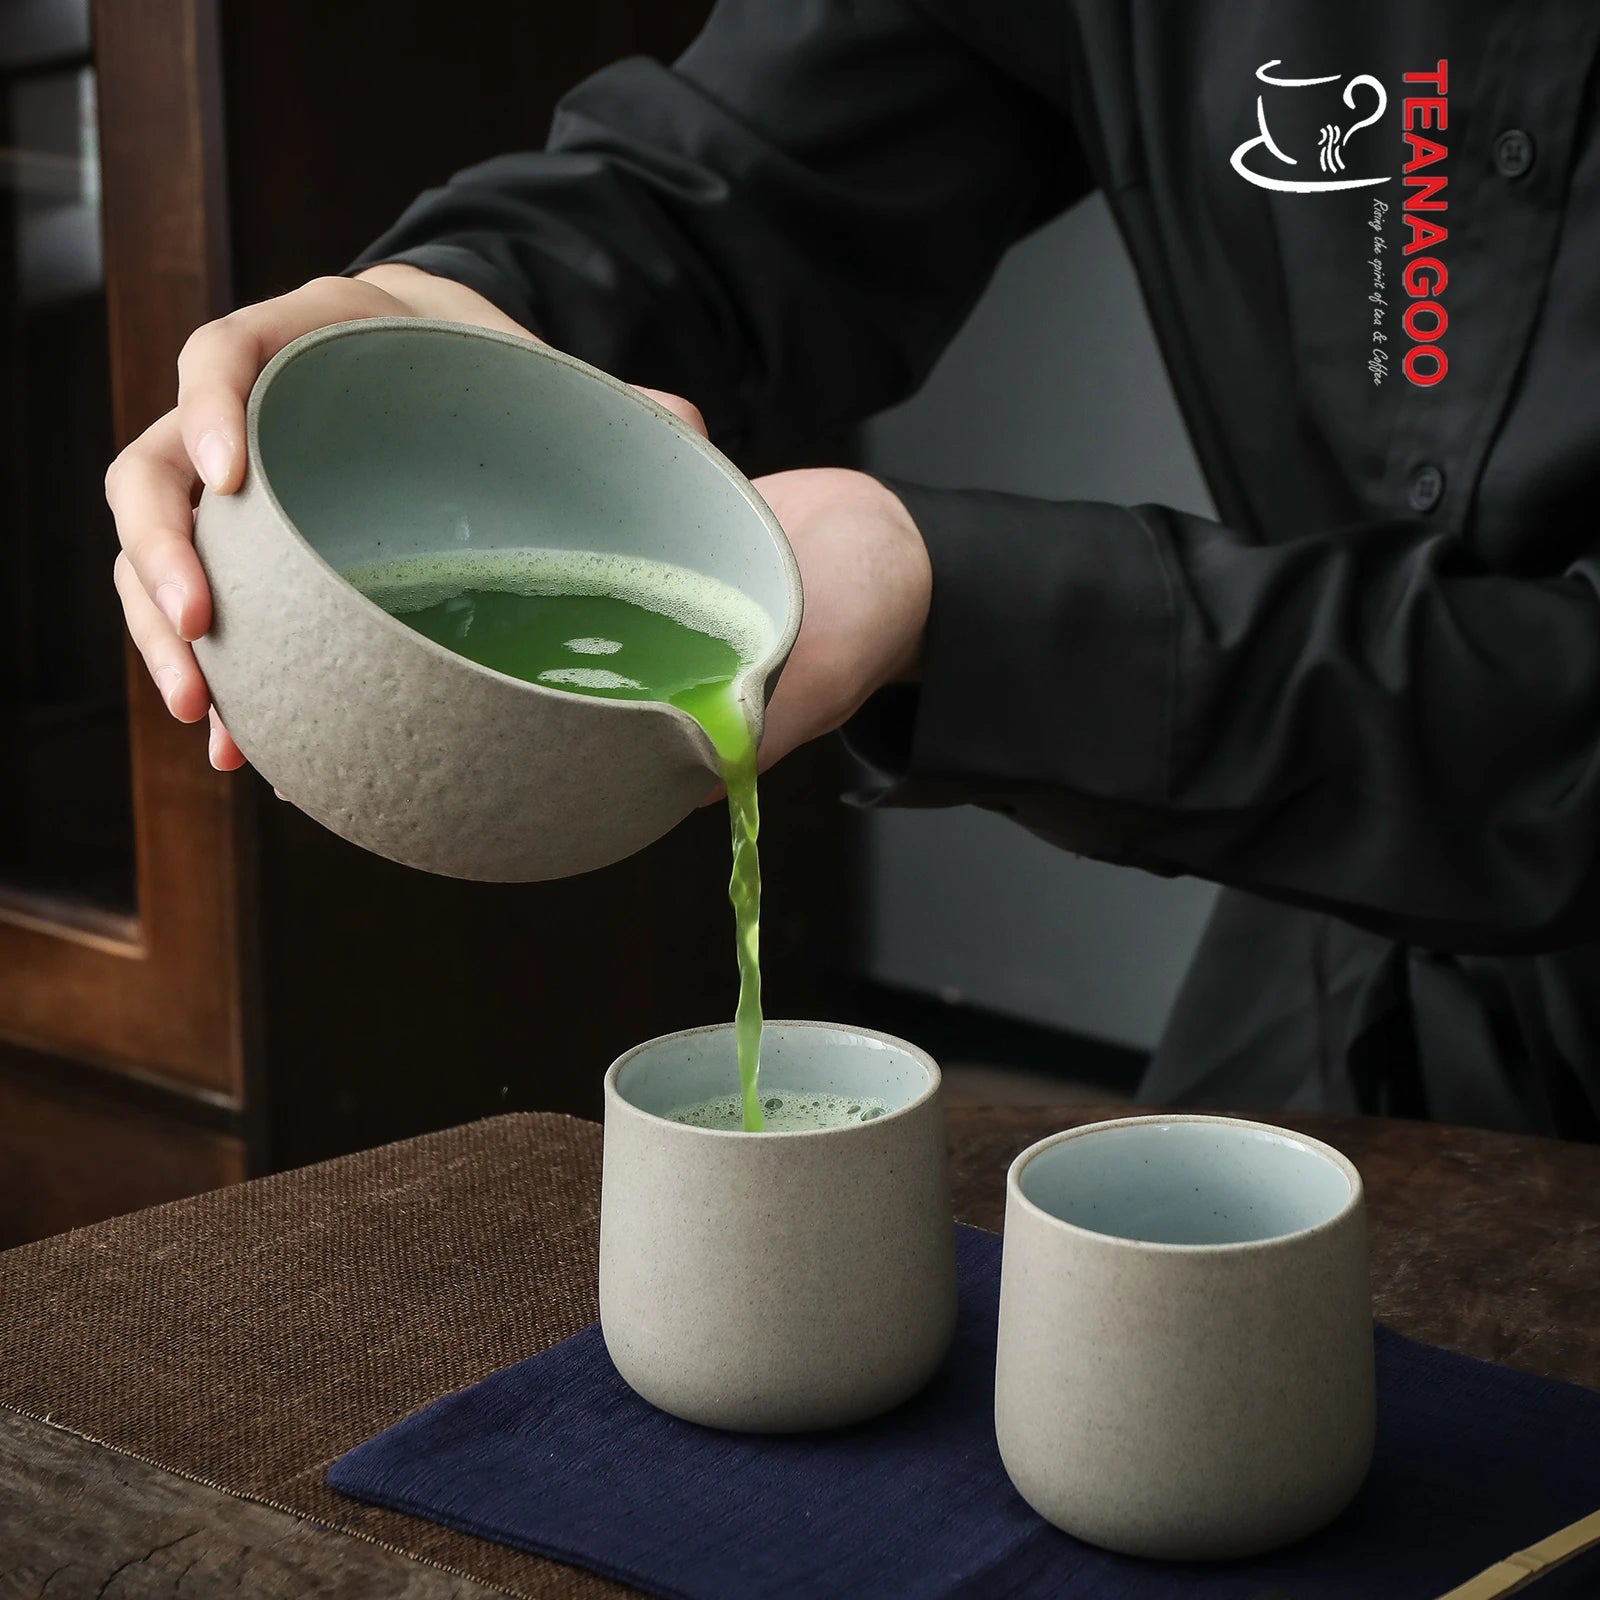 Artcome Japanese Matcha Tea Set, Bowl with Pouring Spout, Whisk, Tea Scoop,  Ceramic Whisk Holder, Matcha Powder Caddy, Handmade Matcha Ceremony Kit